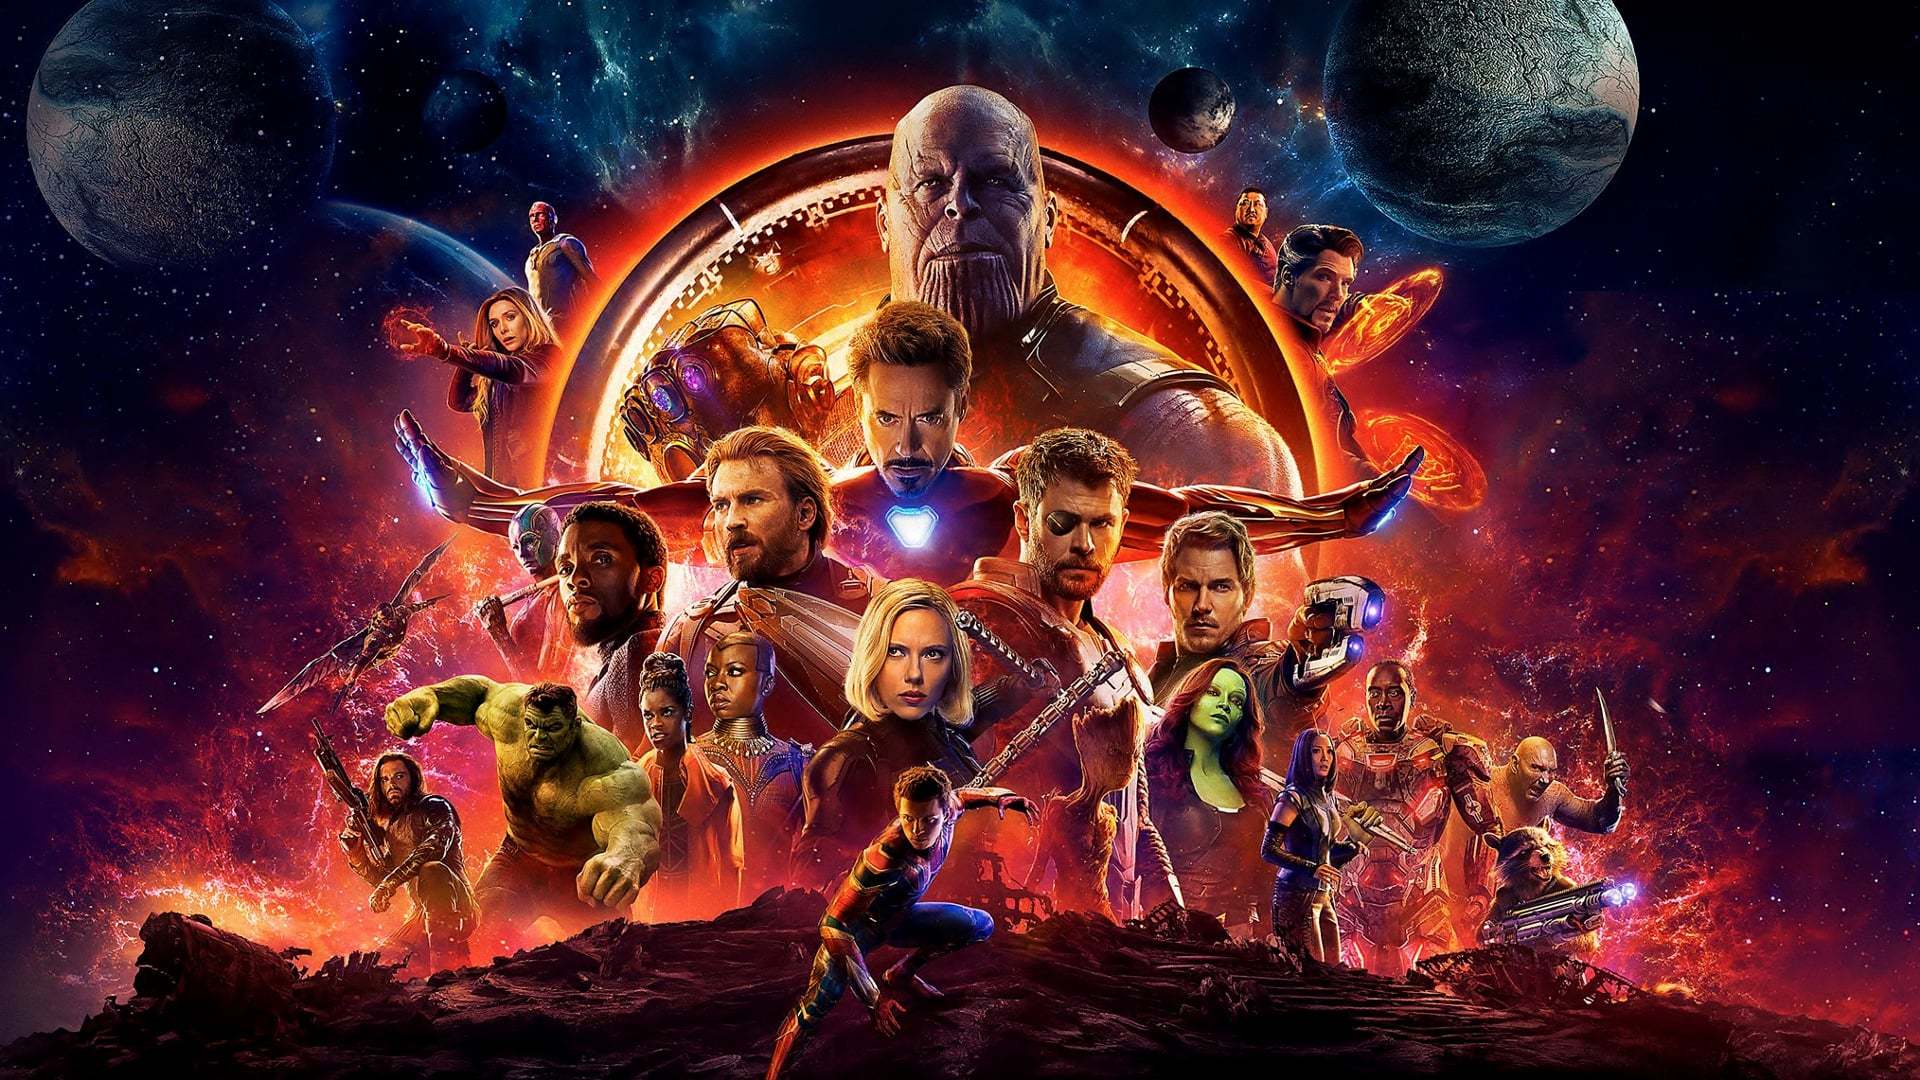 The Avengers: Infinity War directors reveal which two characters the most screen time | GamesRadar+